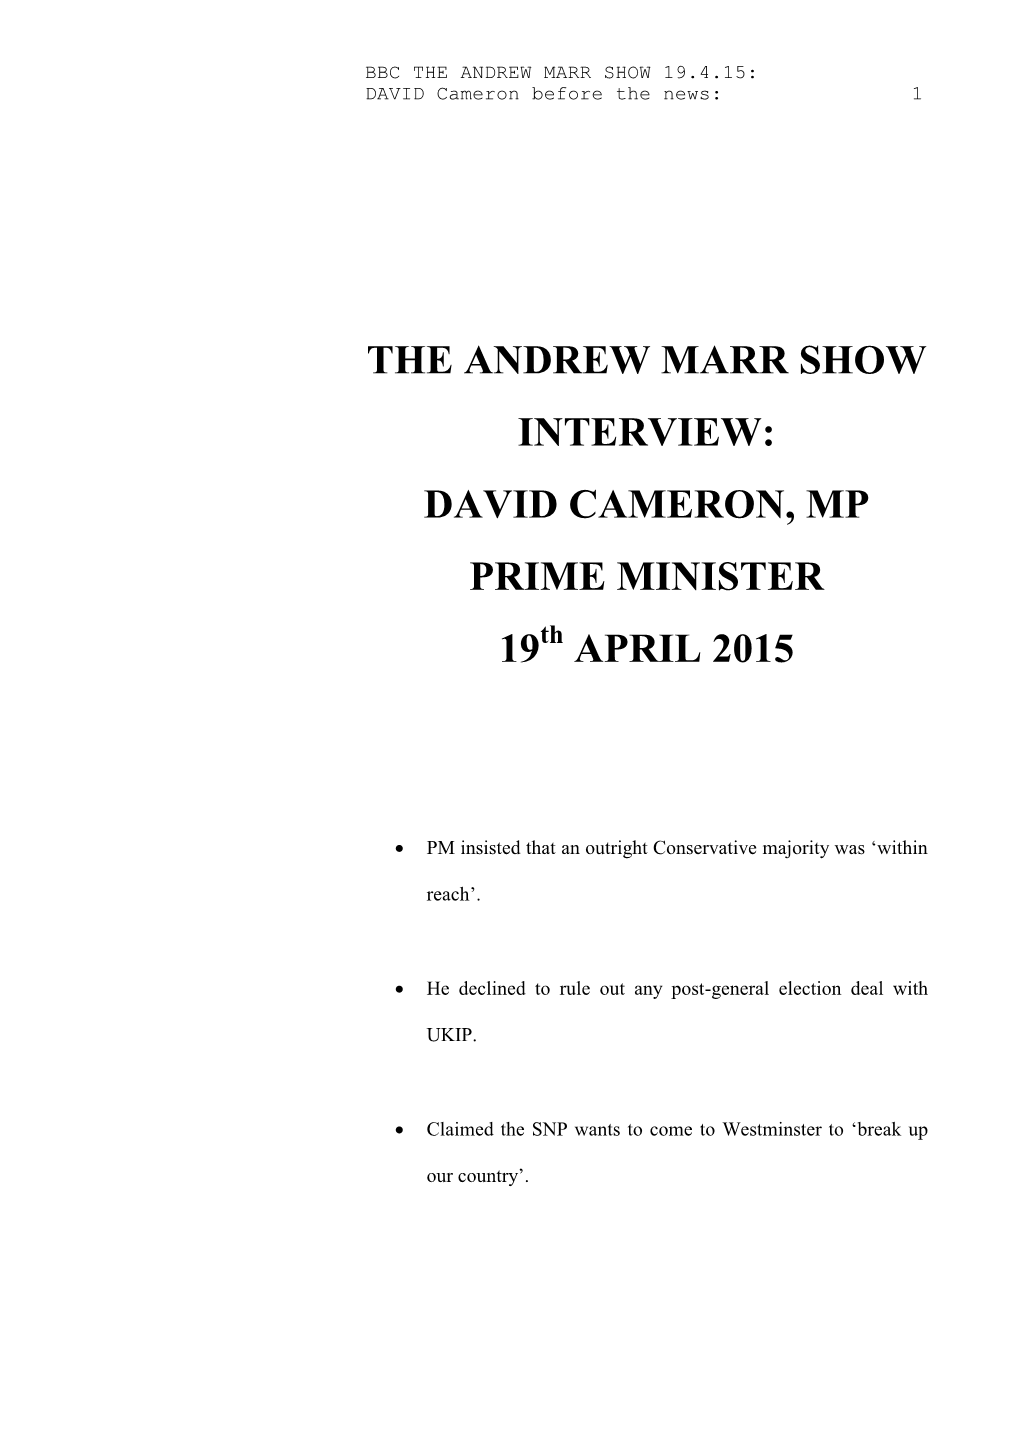 The Andrew Marr Show Interview: David Cameron, Mp Prime Minister 19 April 2015